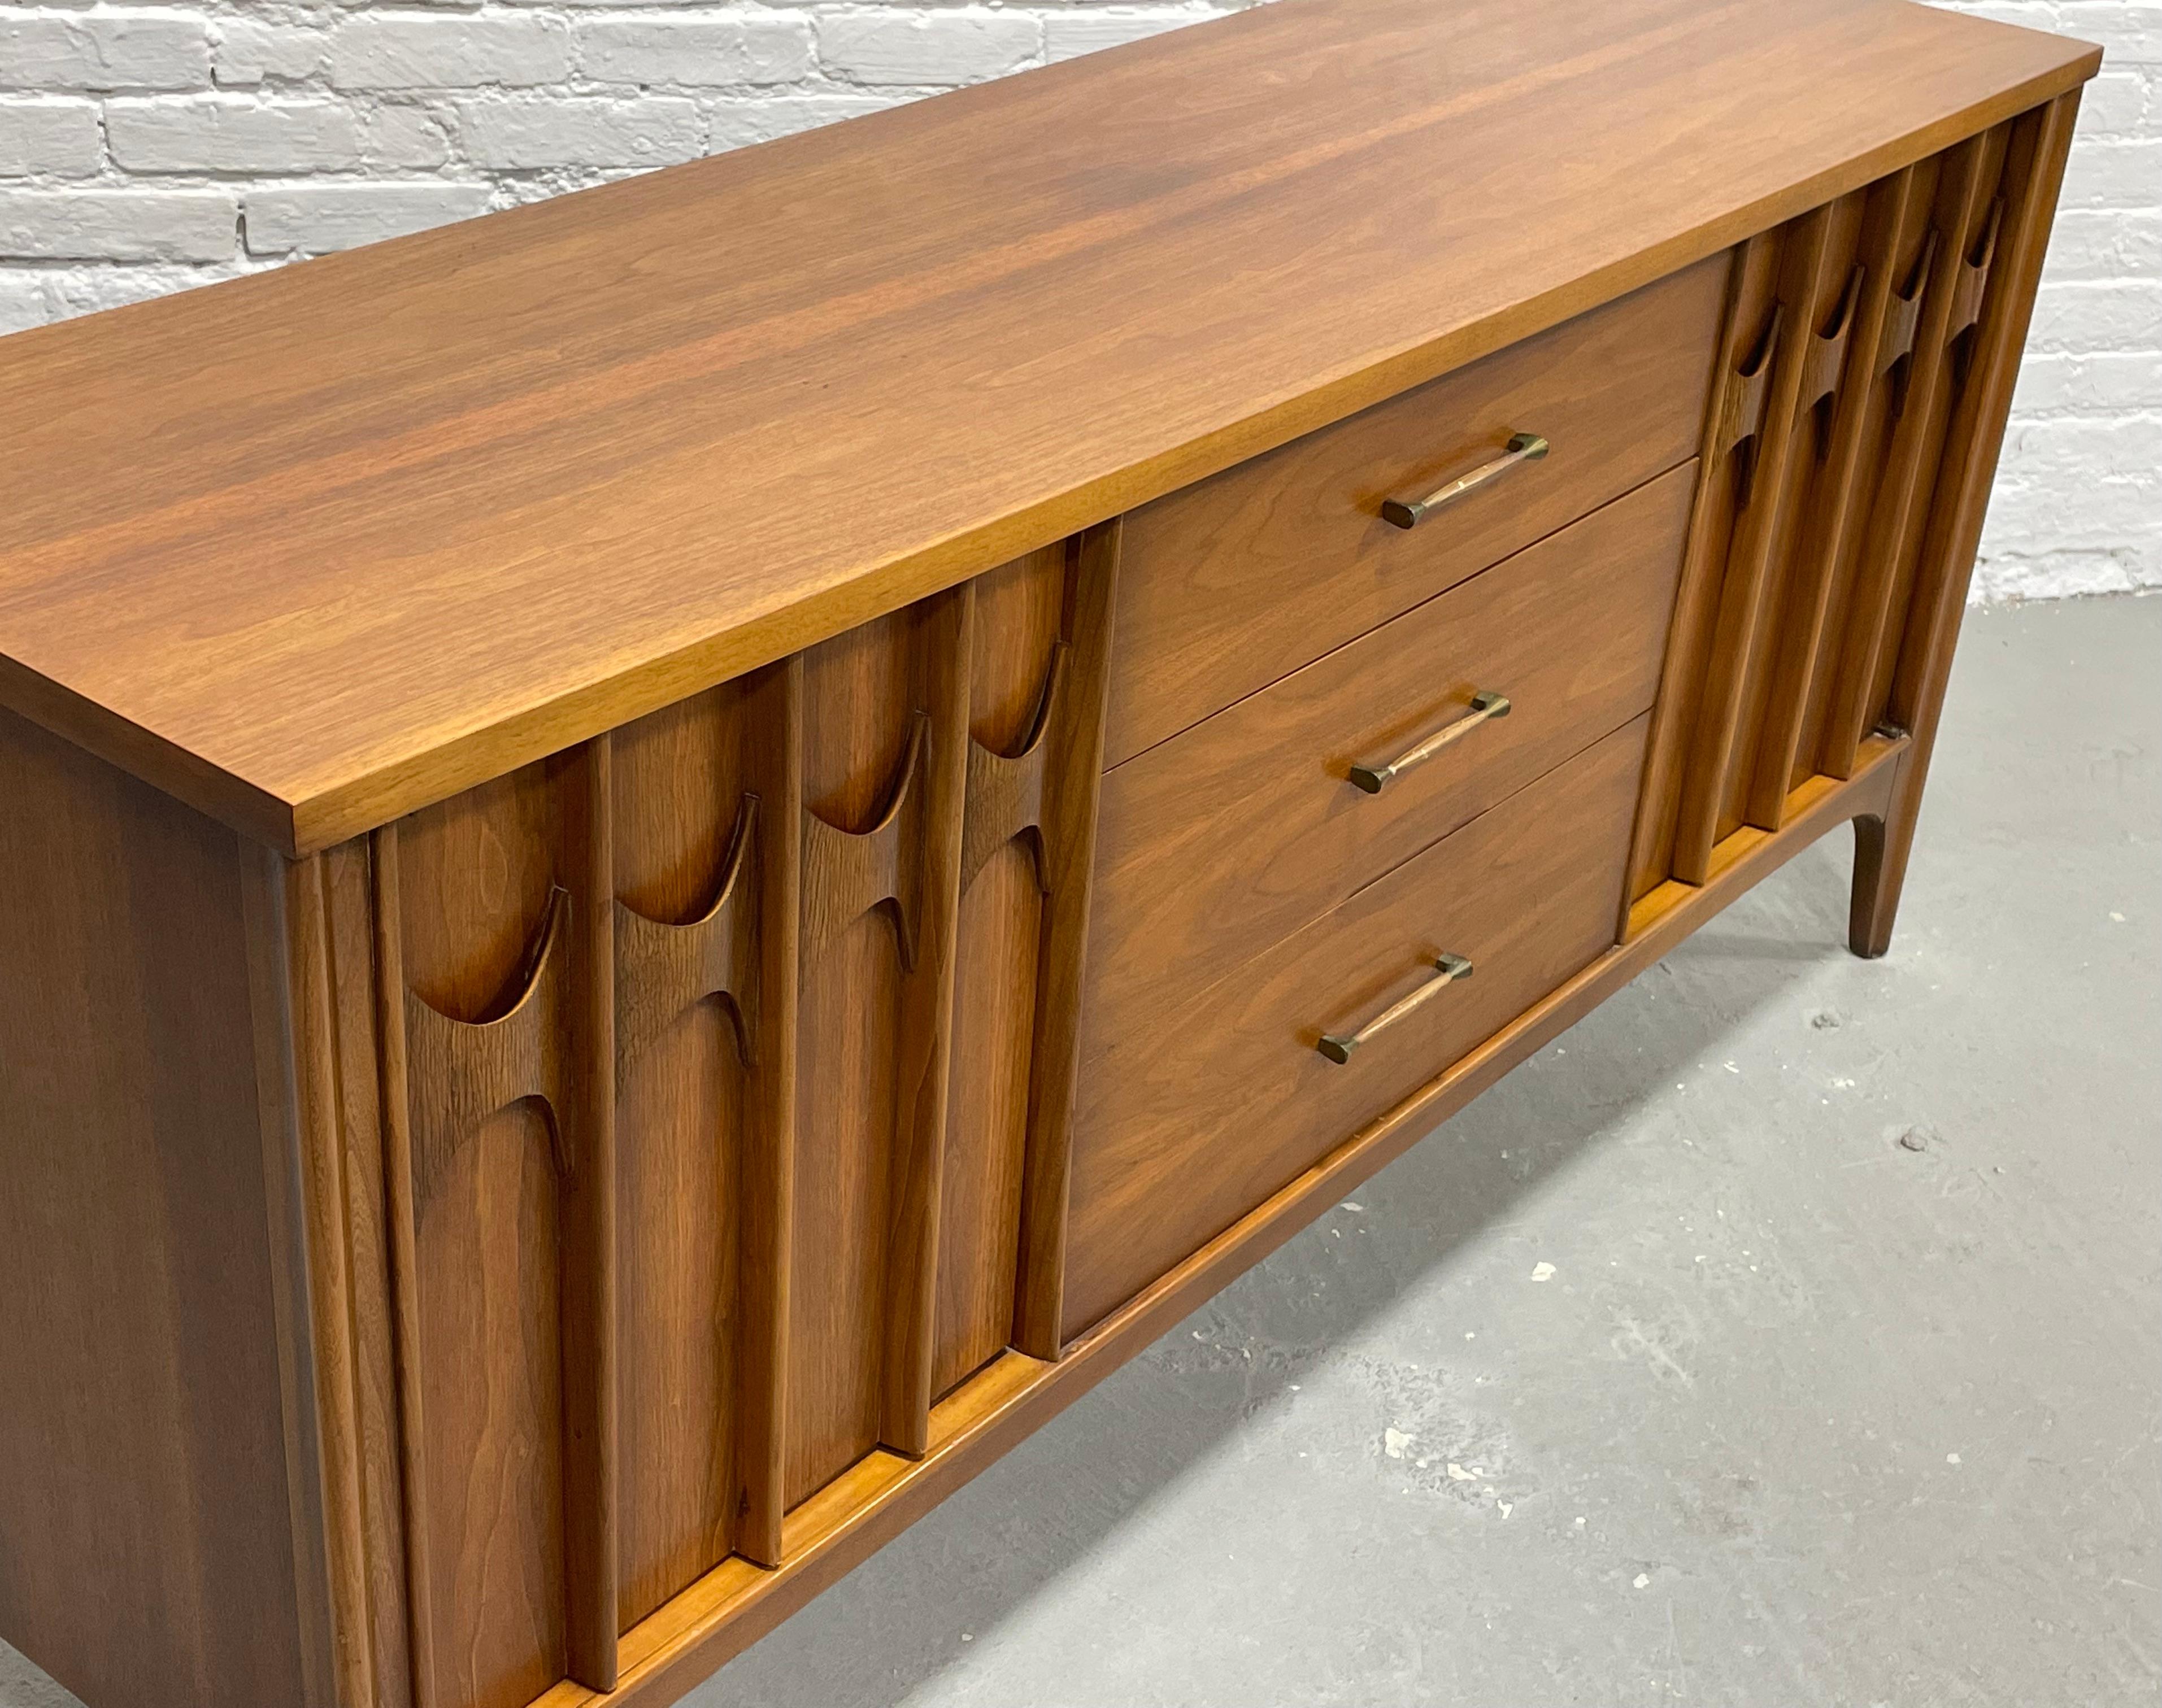 SCULPTED Mid Century MODERN CREDENZA / Long Dresser by Kent Coffey Perspecta, c. 5